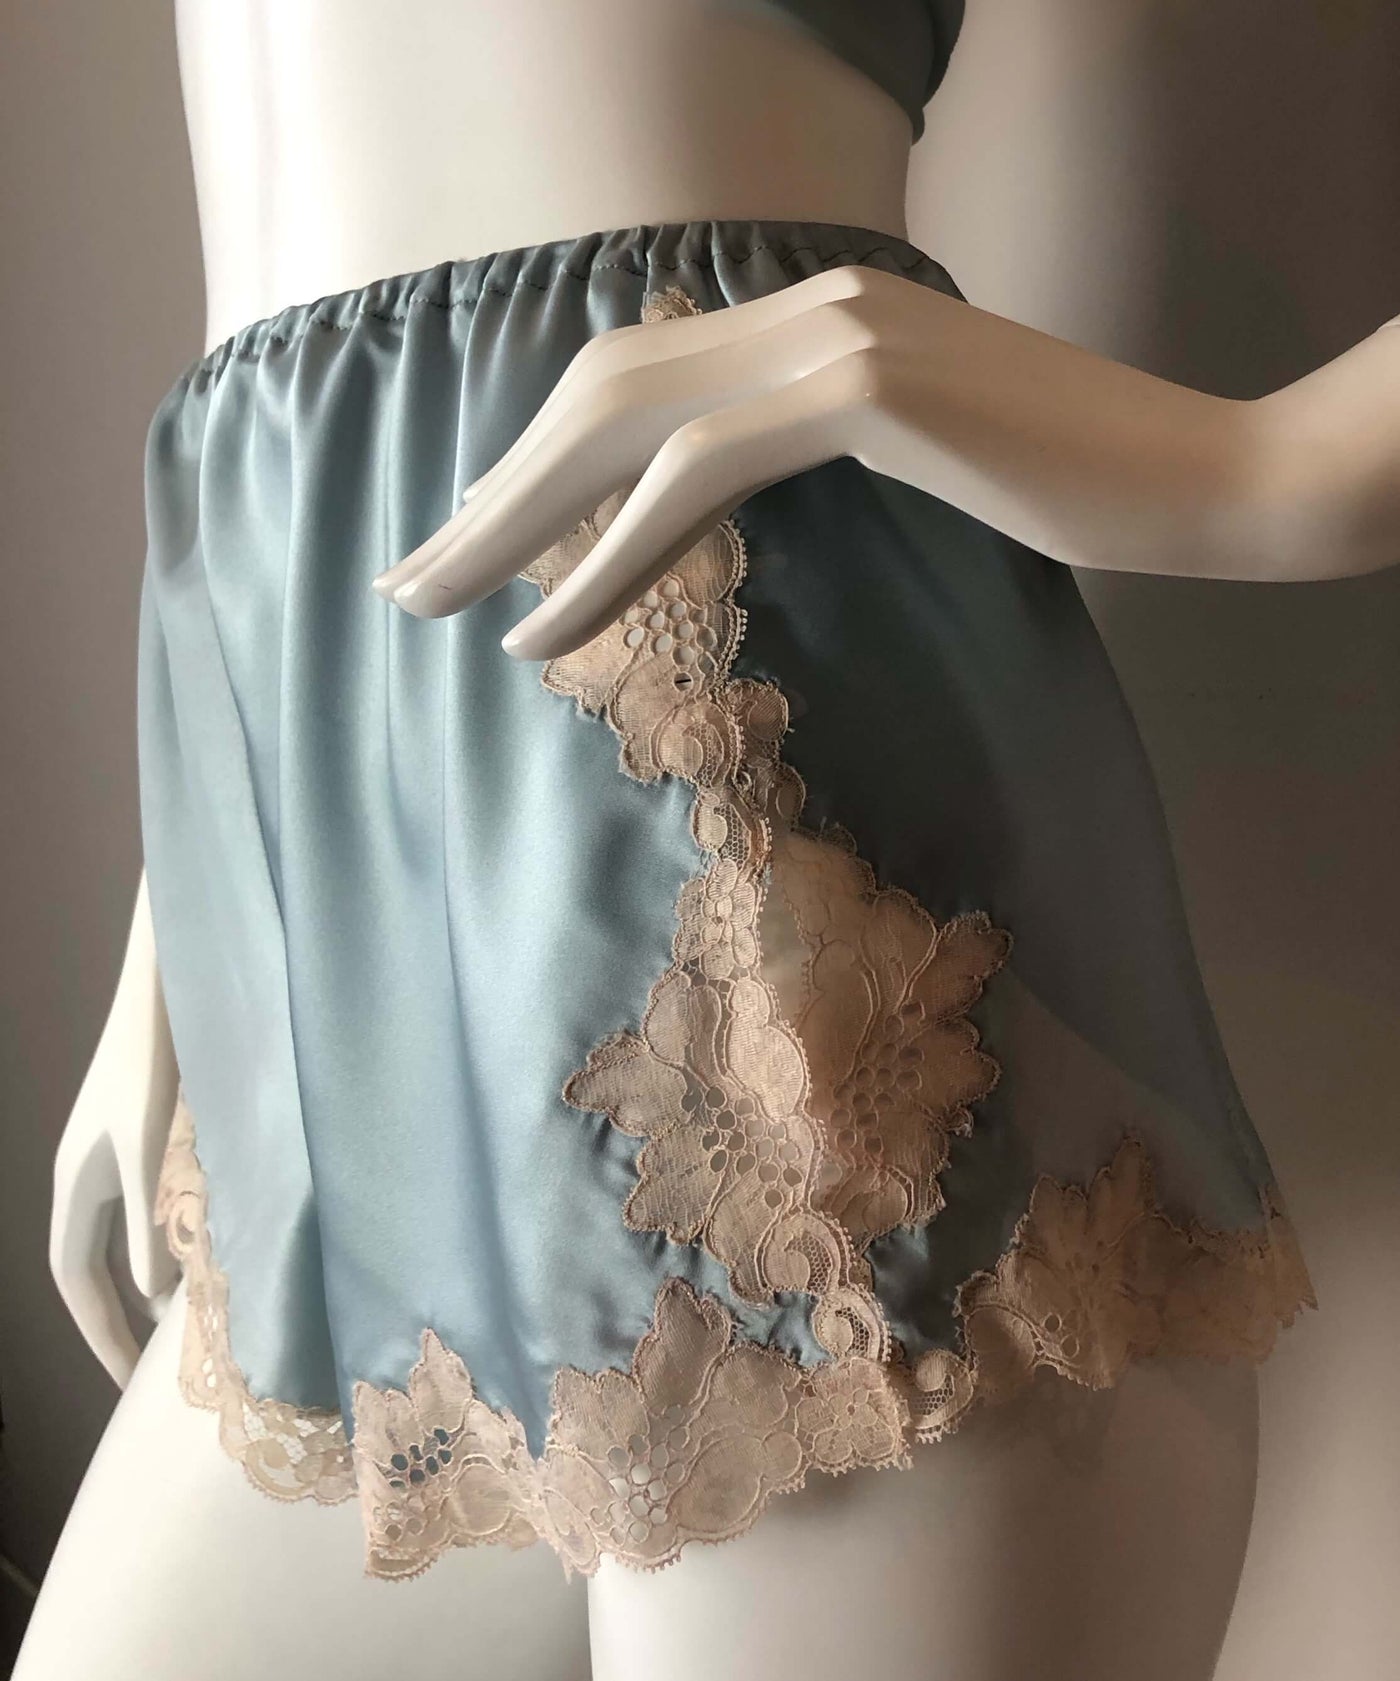 Dusty blue satin slip dress with matching cami shorts